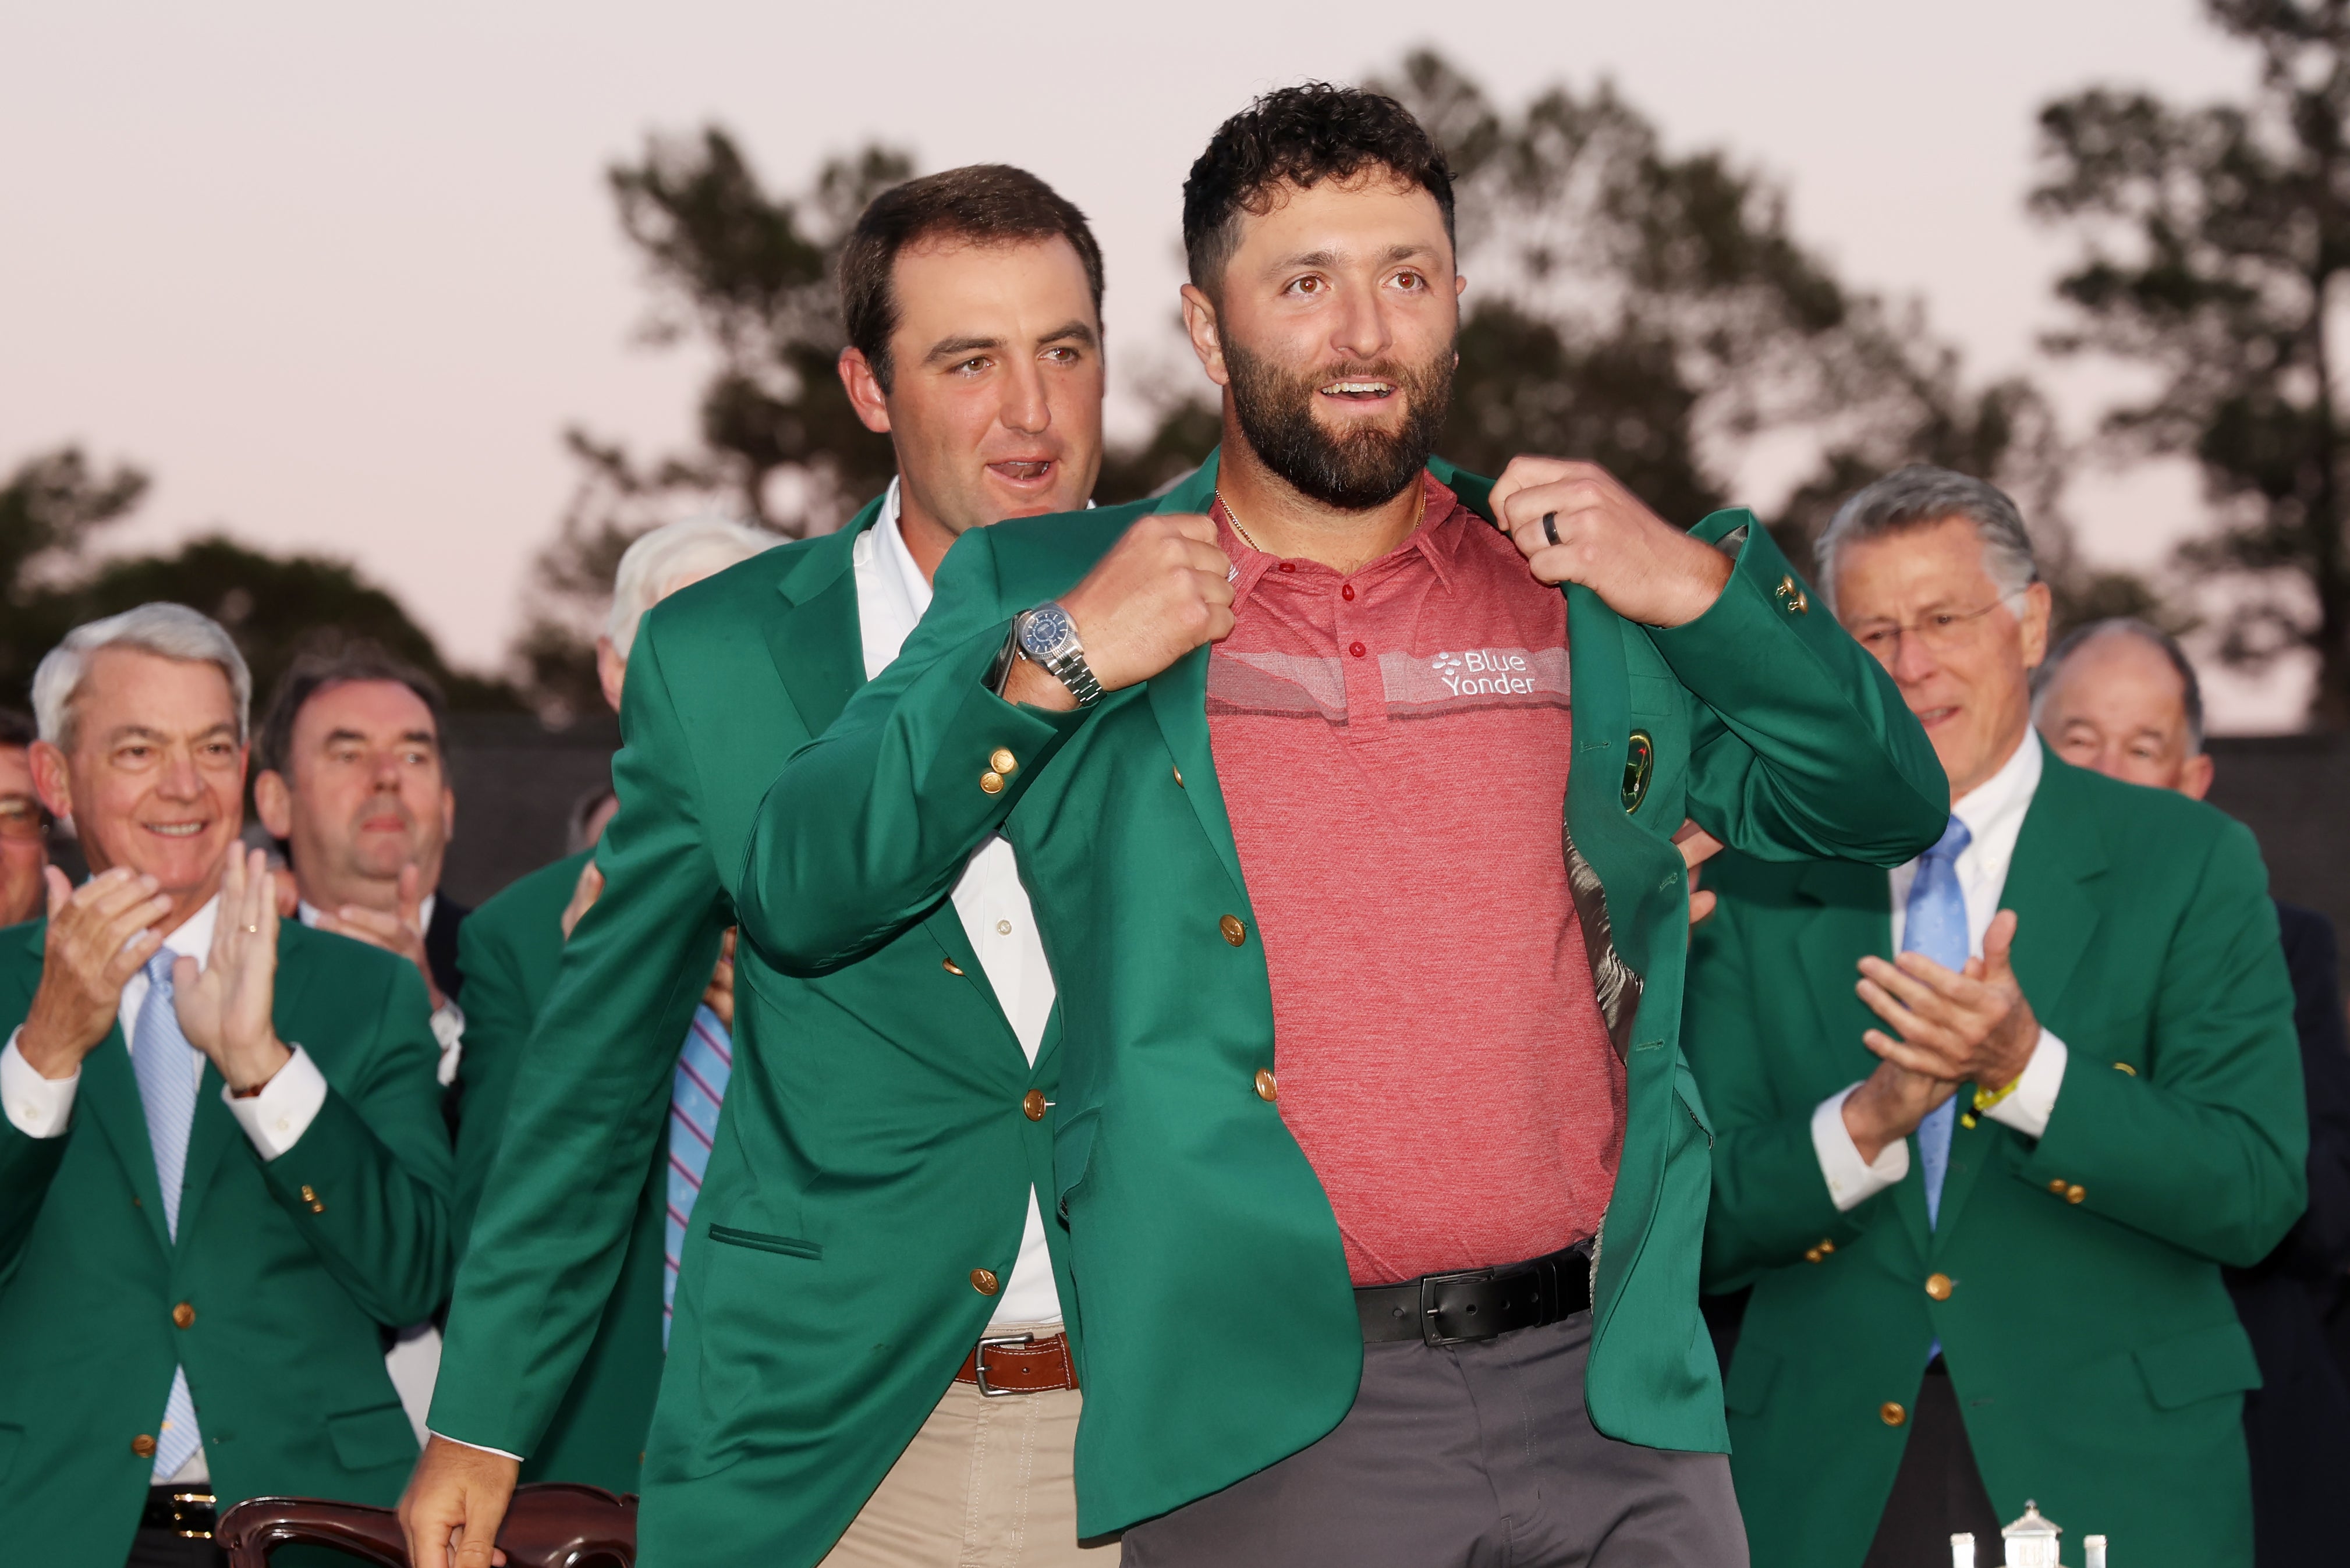 Jon Rahm is defending the title he won a year ago